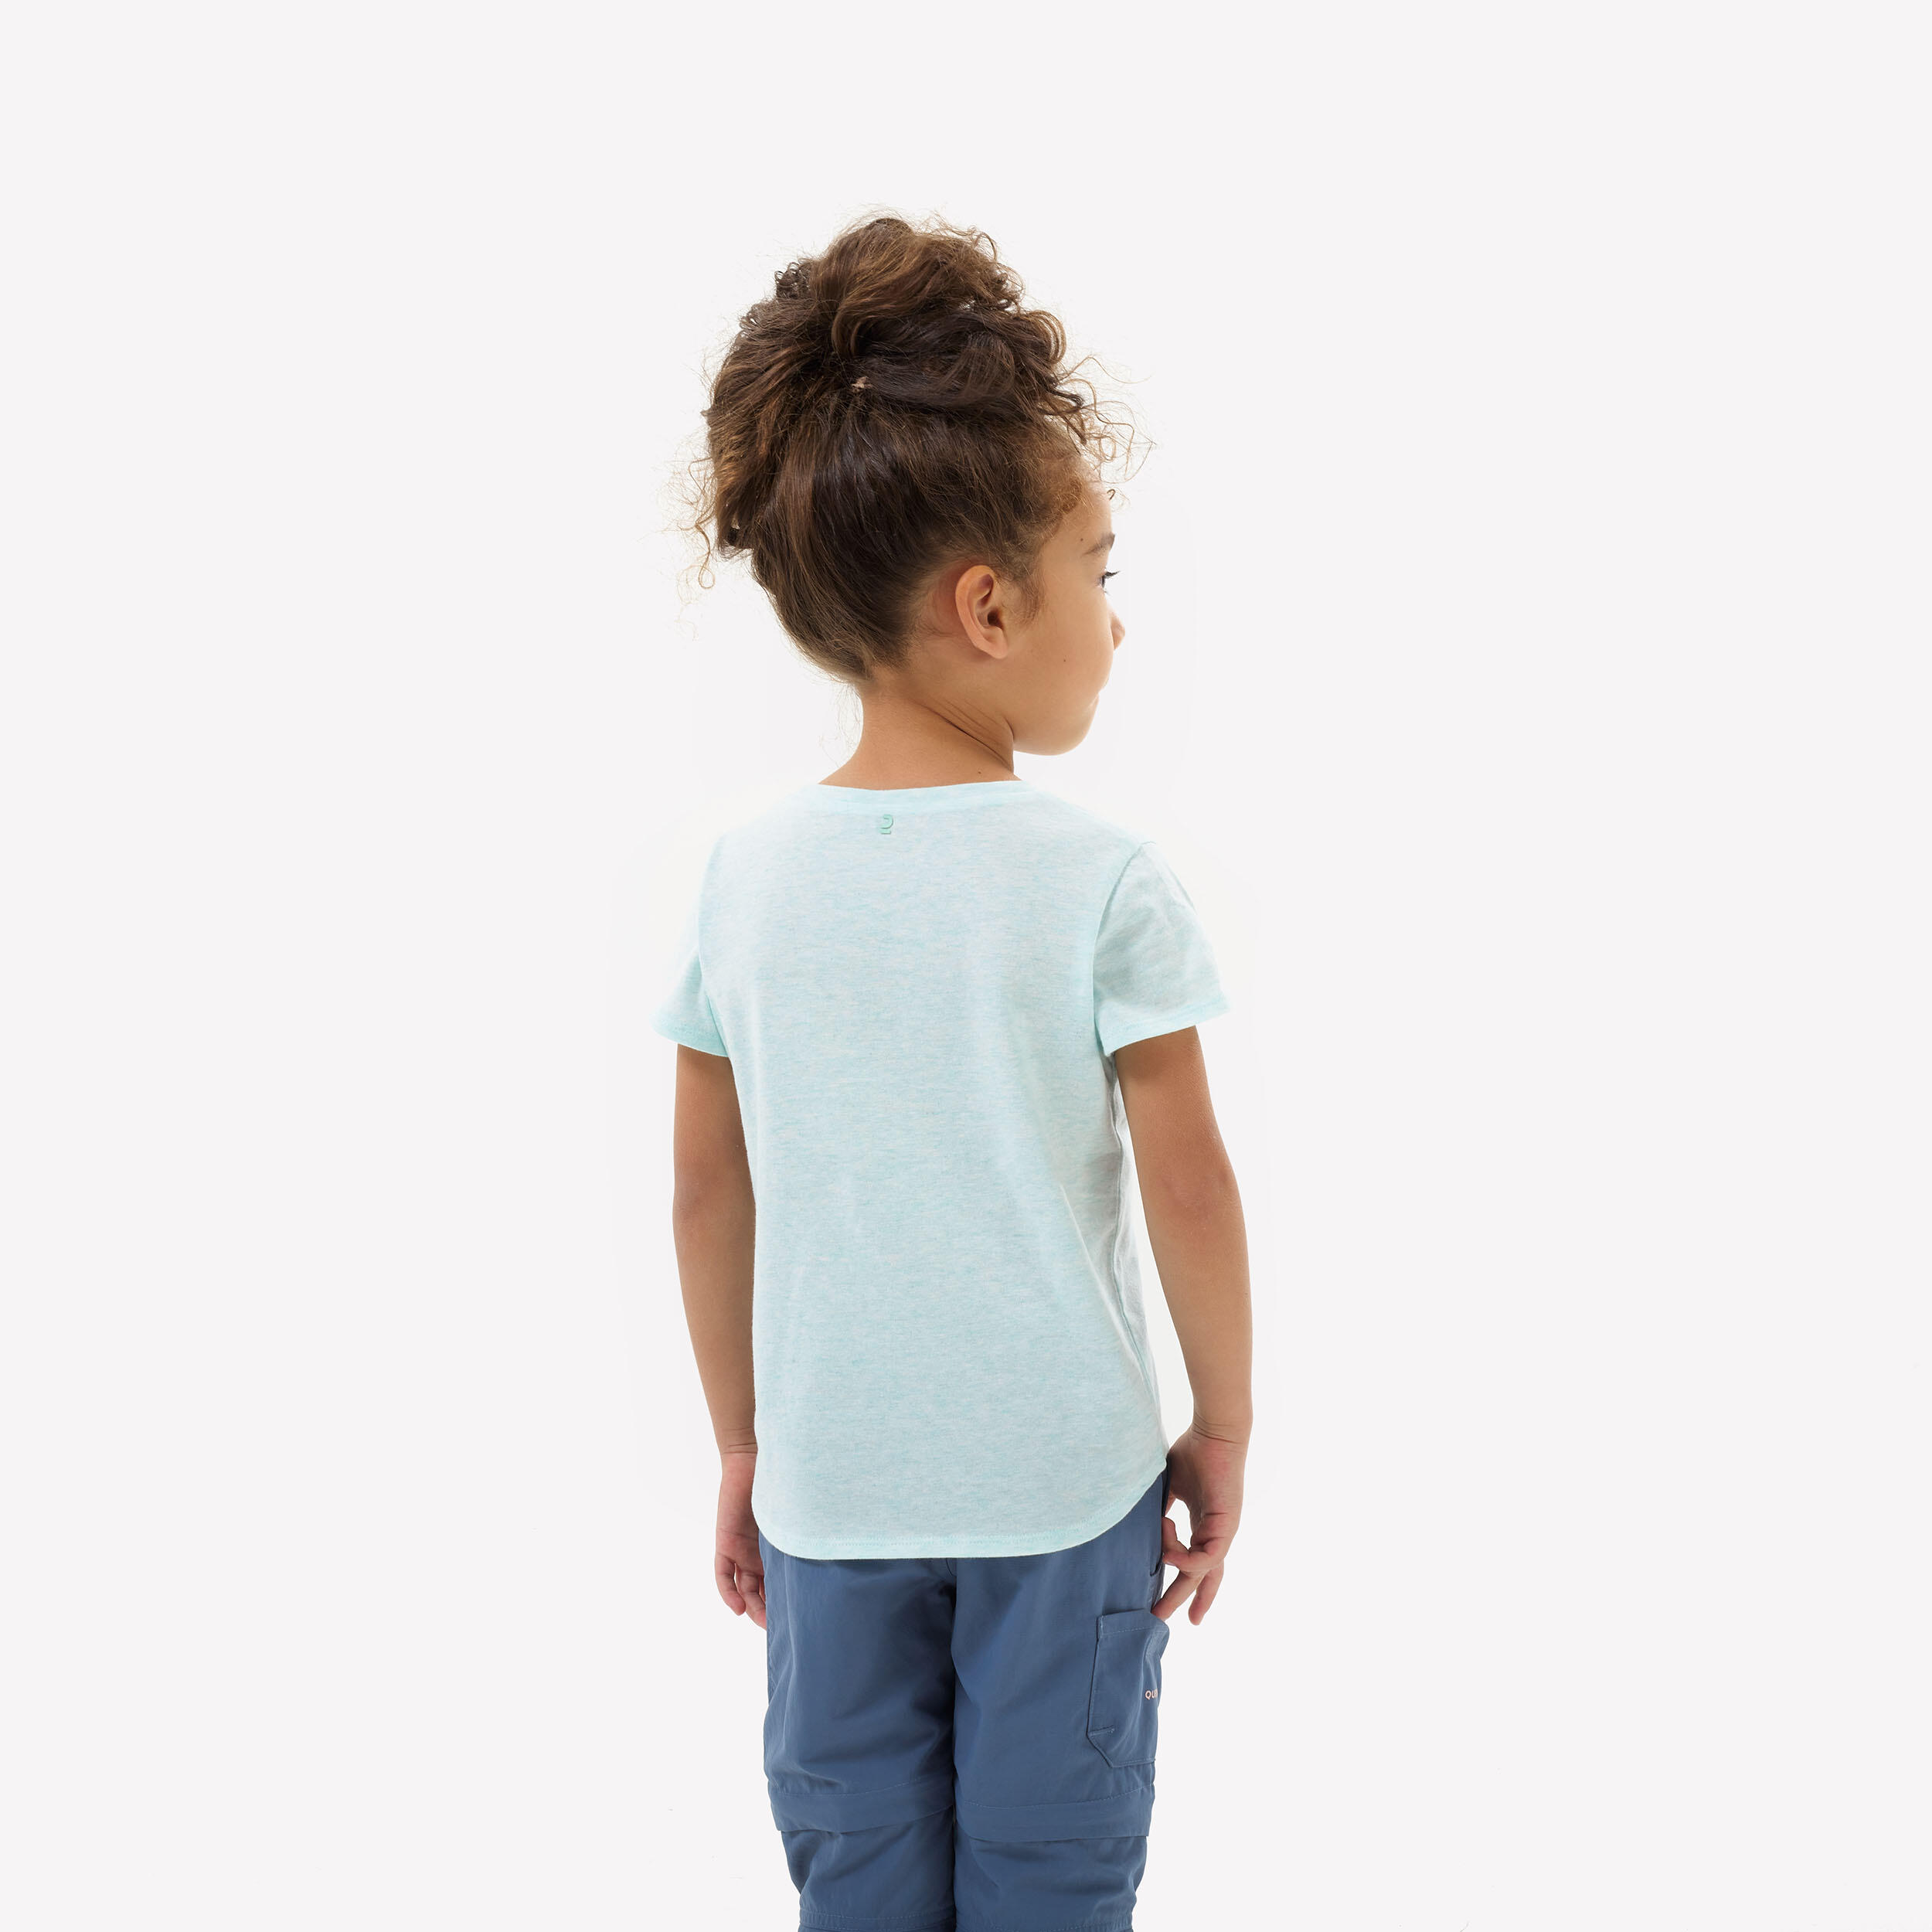 Kids’ T-Shirt - MH100 Ages 2-6 - Green 4/6